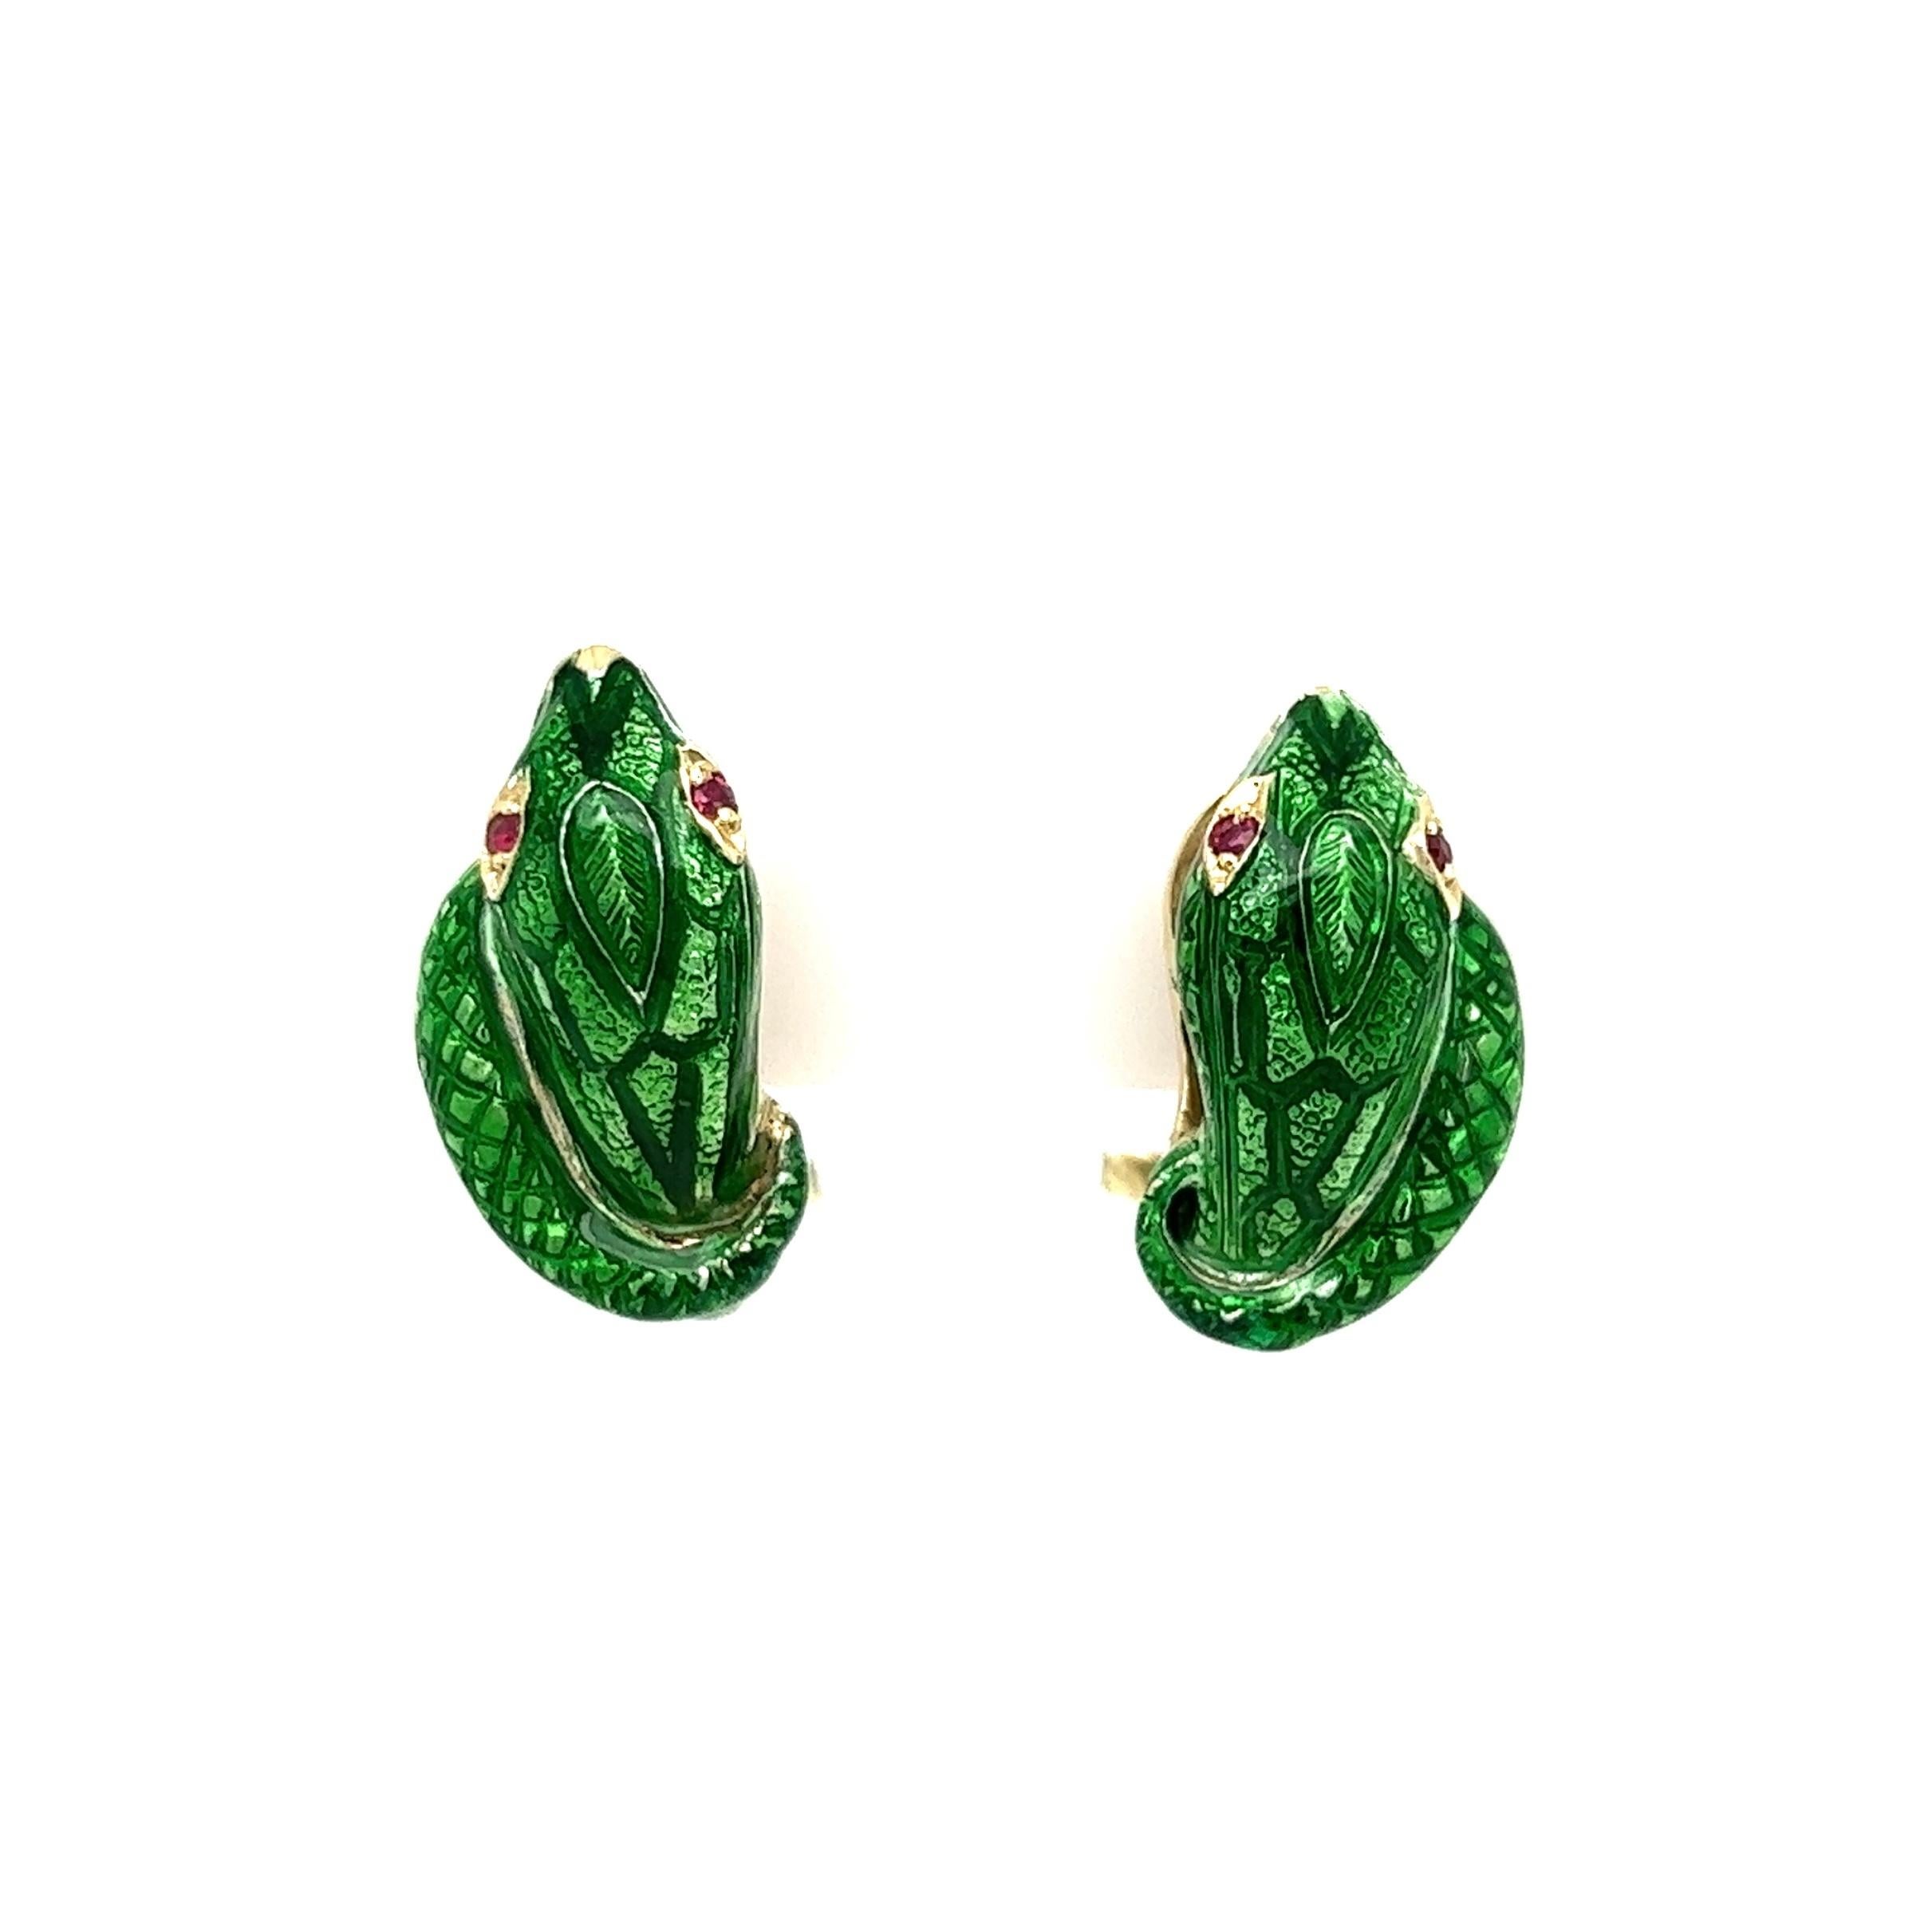 Striking Designer Victor Mayer Green Enamel Serpent and Hand set Ruby Eyes Gold Earrings. Hand crafted in 14K Yellow Gold. This piece has a wonderful, old-world charm. A wonderful decadent example of the Egyptian Revival style! Super Cool Classic